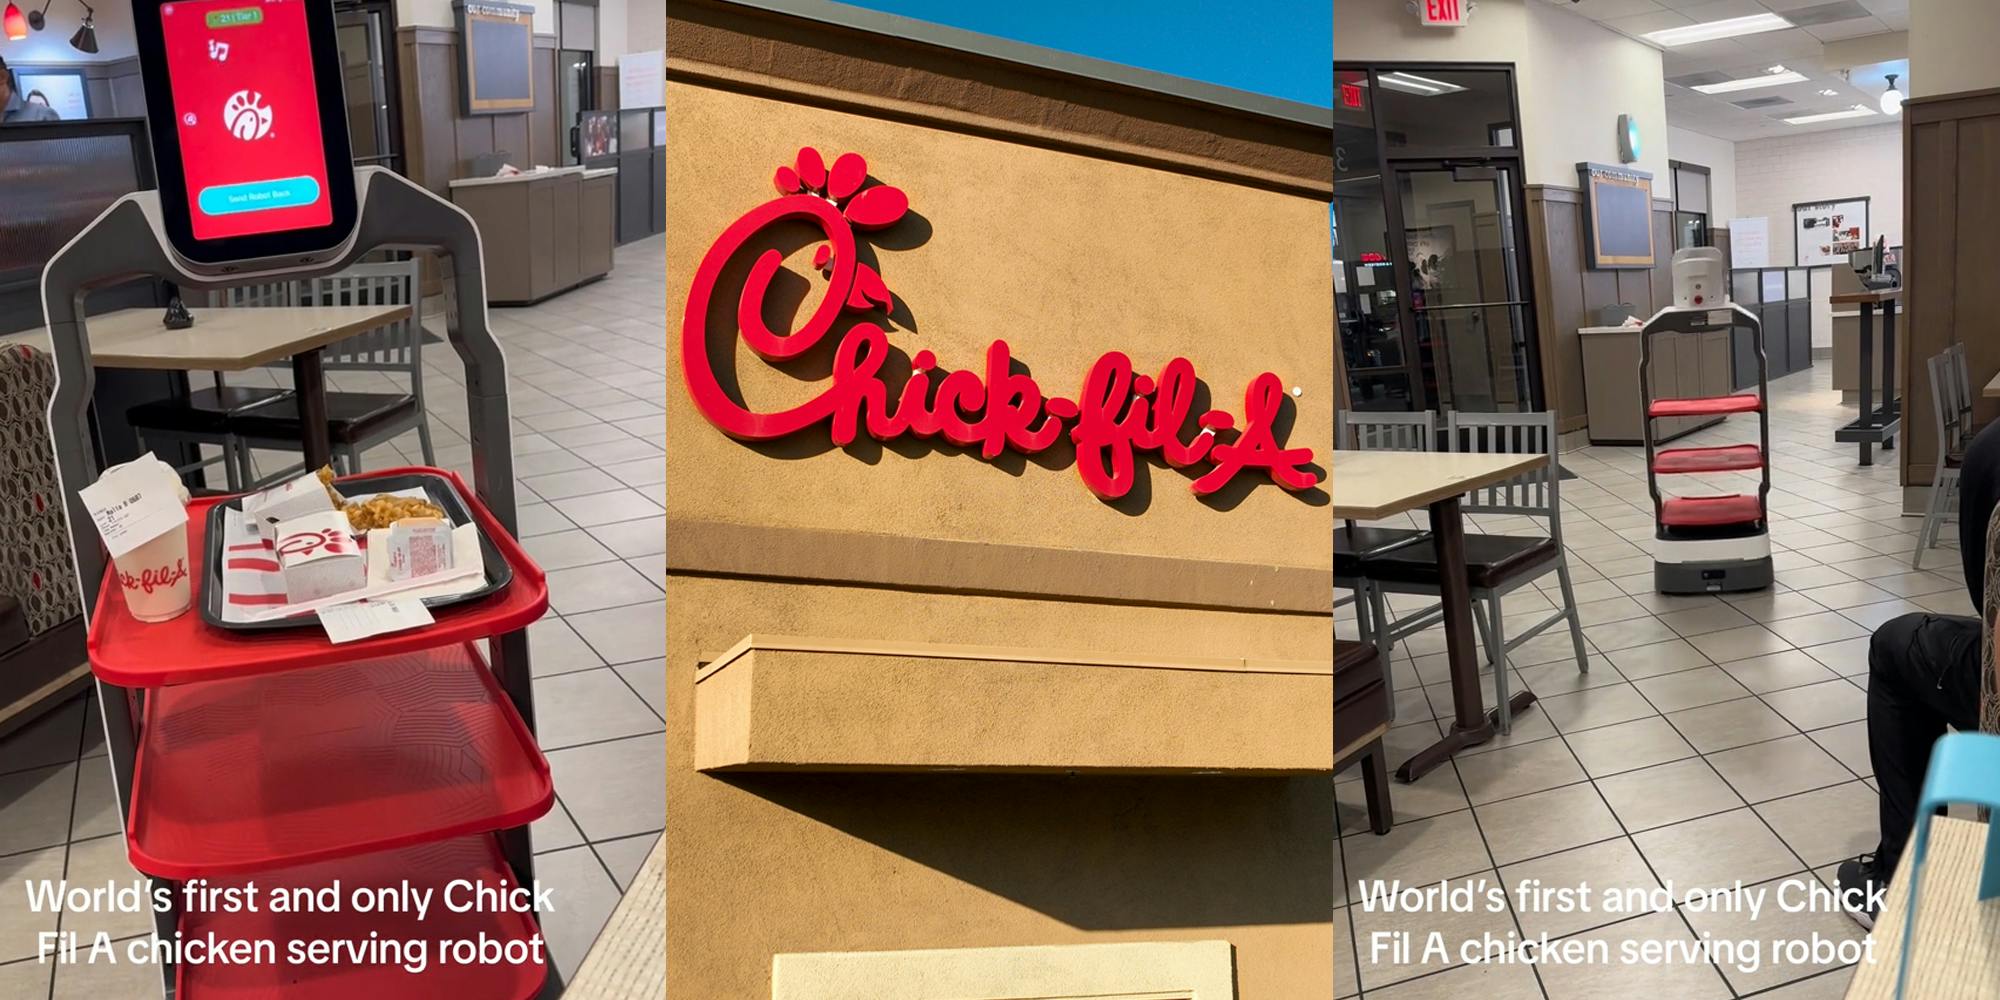 Chick-Fil-A server robot with caption "World's first and only Chick Fil A chicken serving robot" (l) Chick-Fil-A building with sign (c) Chick-Fil-A server robot with caption "World's first and only Chick Fil A chicken serving robot" (r)